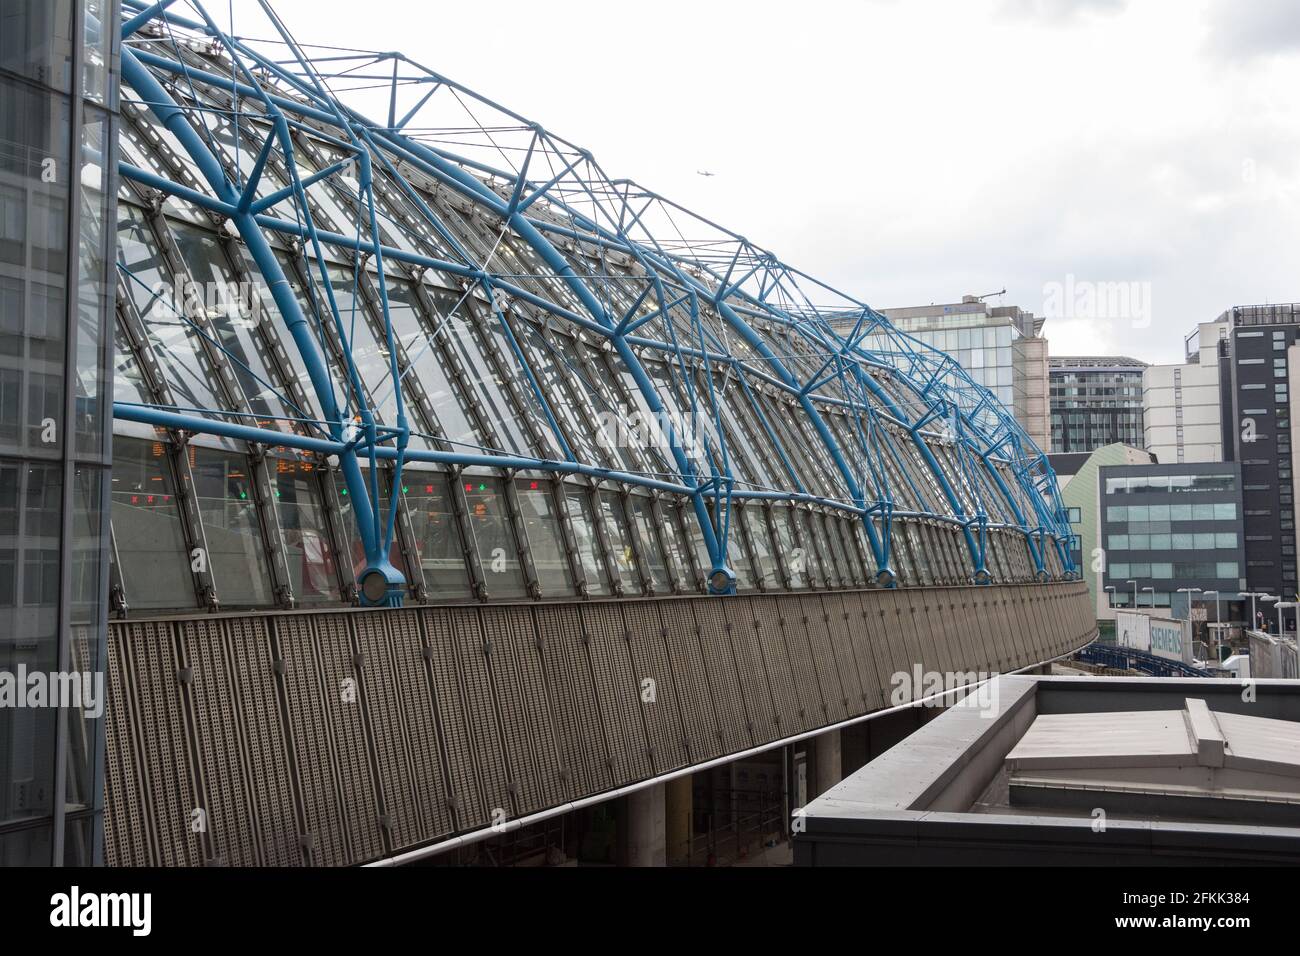 The curved glass roof of Nicholas Grimshaw's International Terminal, Waterloo Station, York Road, London, SE1, UK Stock Photo